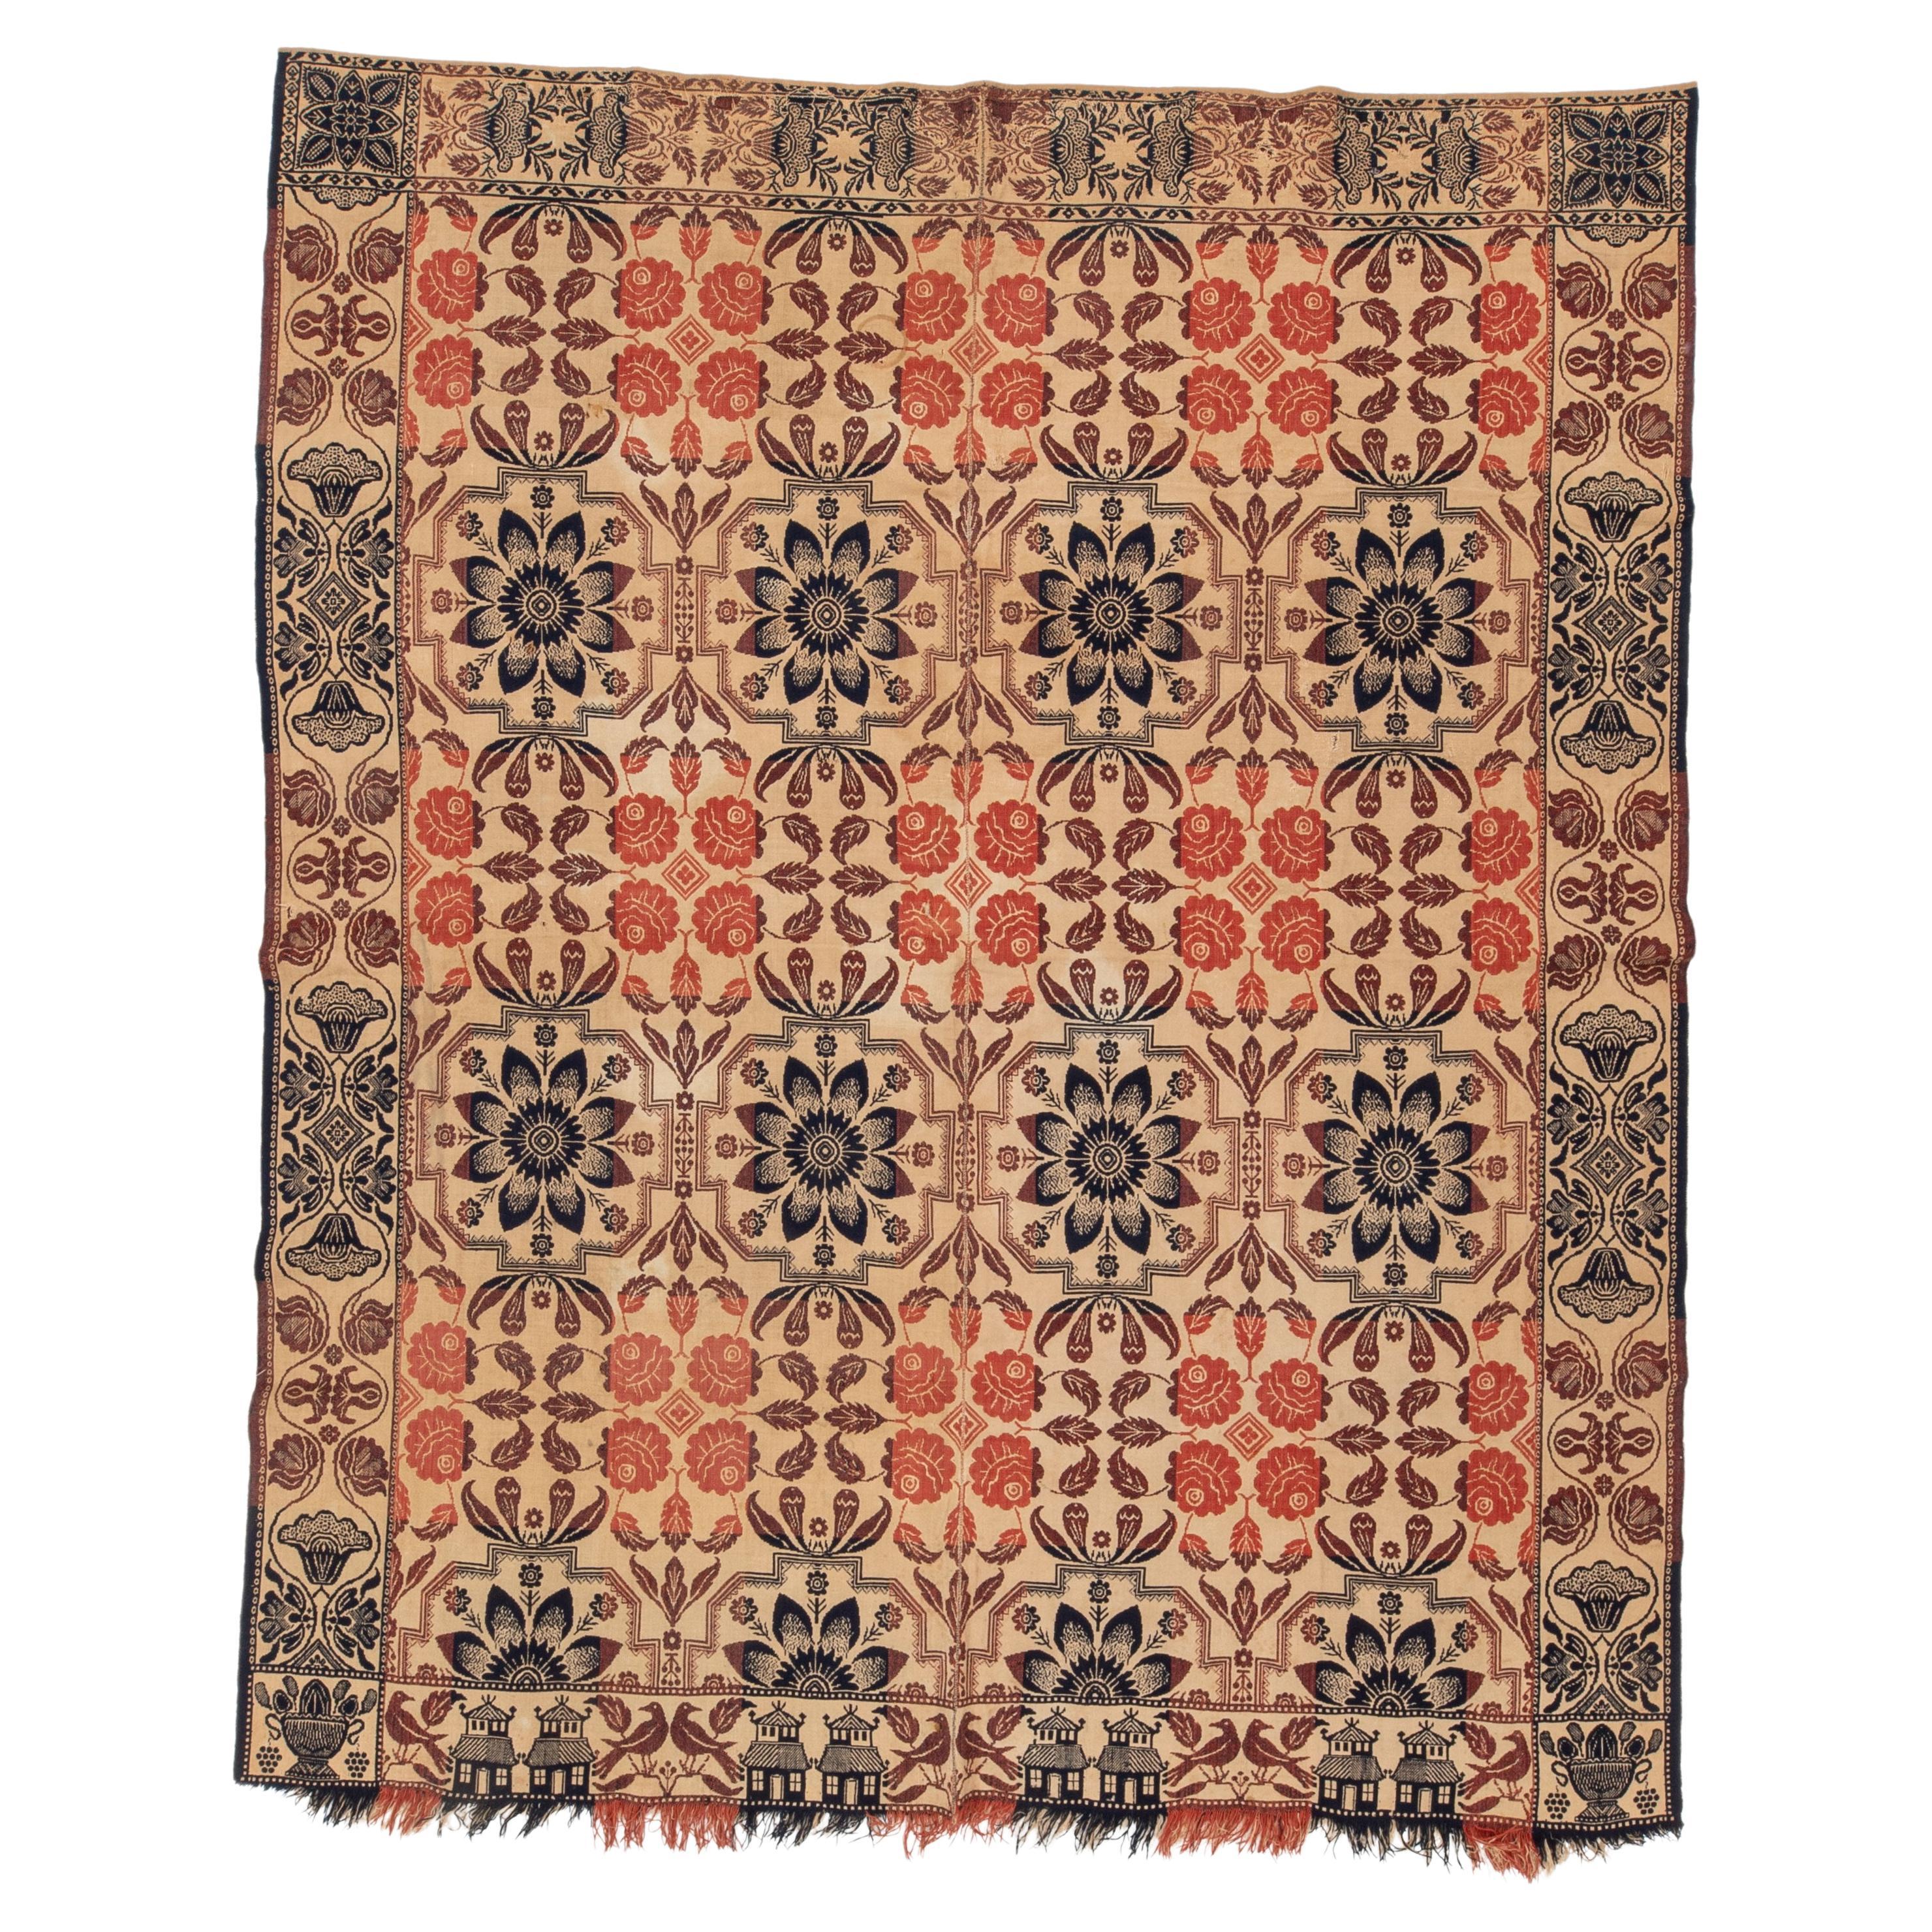 Jaquard Woven American Coverlet 19th C.